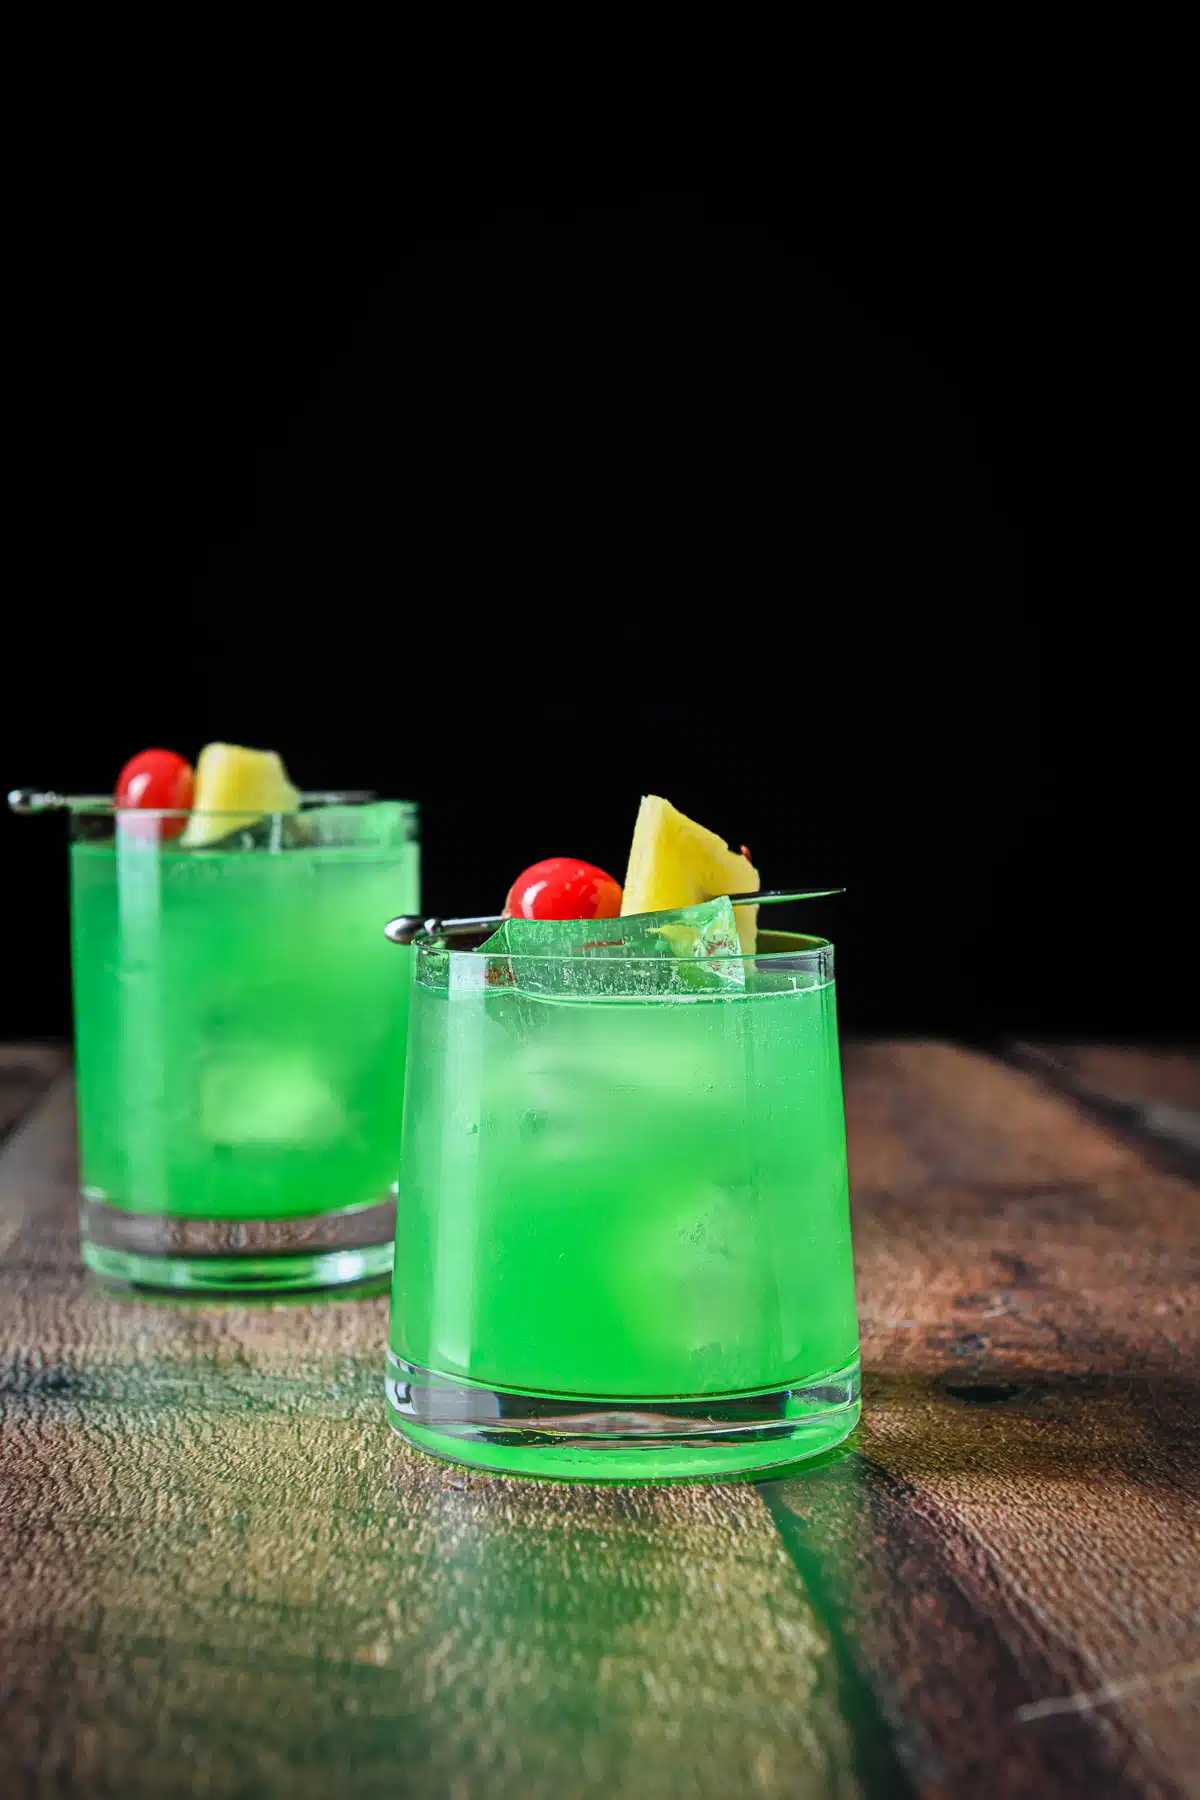 Luck of the Irish Cocktail - Dishes Delish